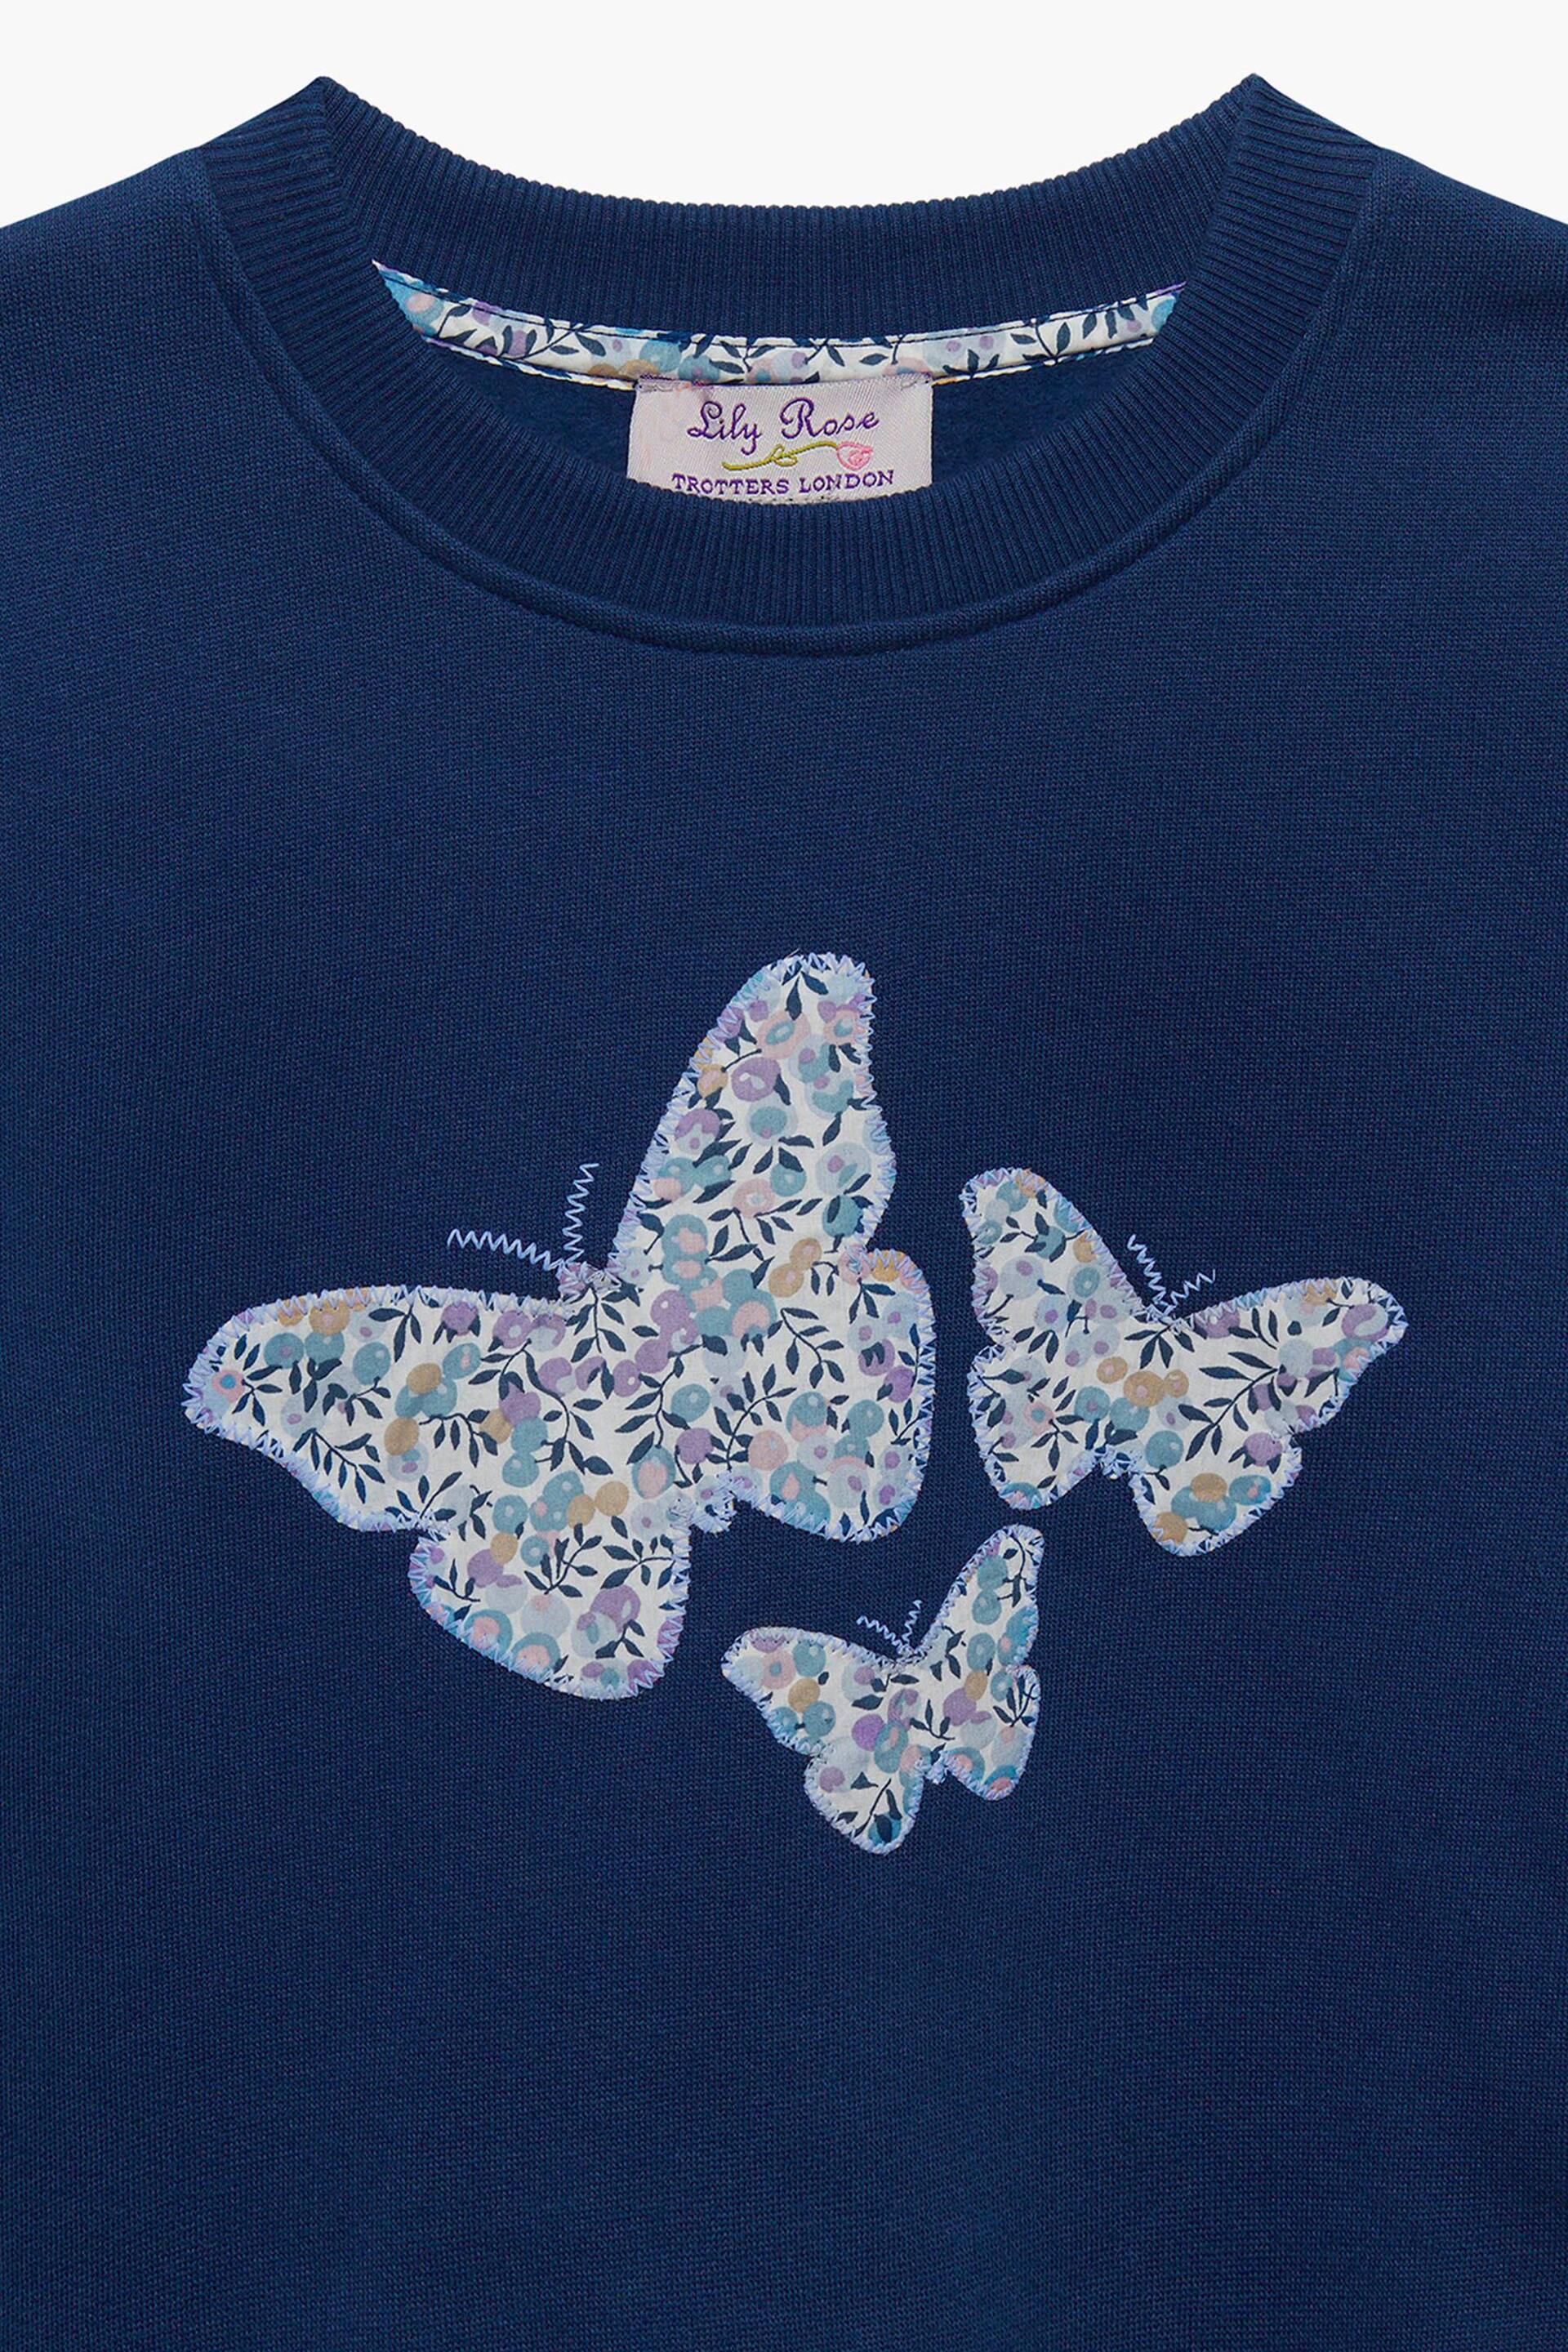 Trotters London Liberty Print Blue Wiltshire Butterfly Cotton Sweatshirt - Image 4 of 4